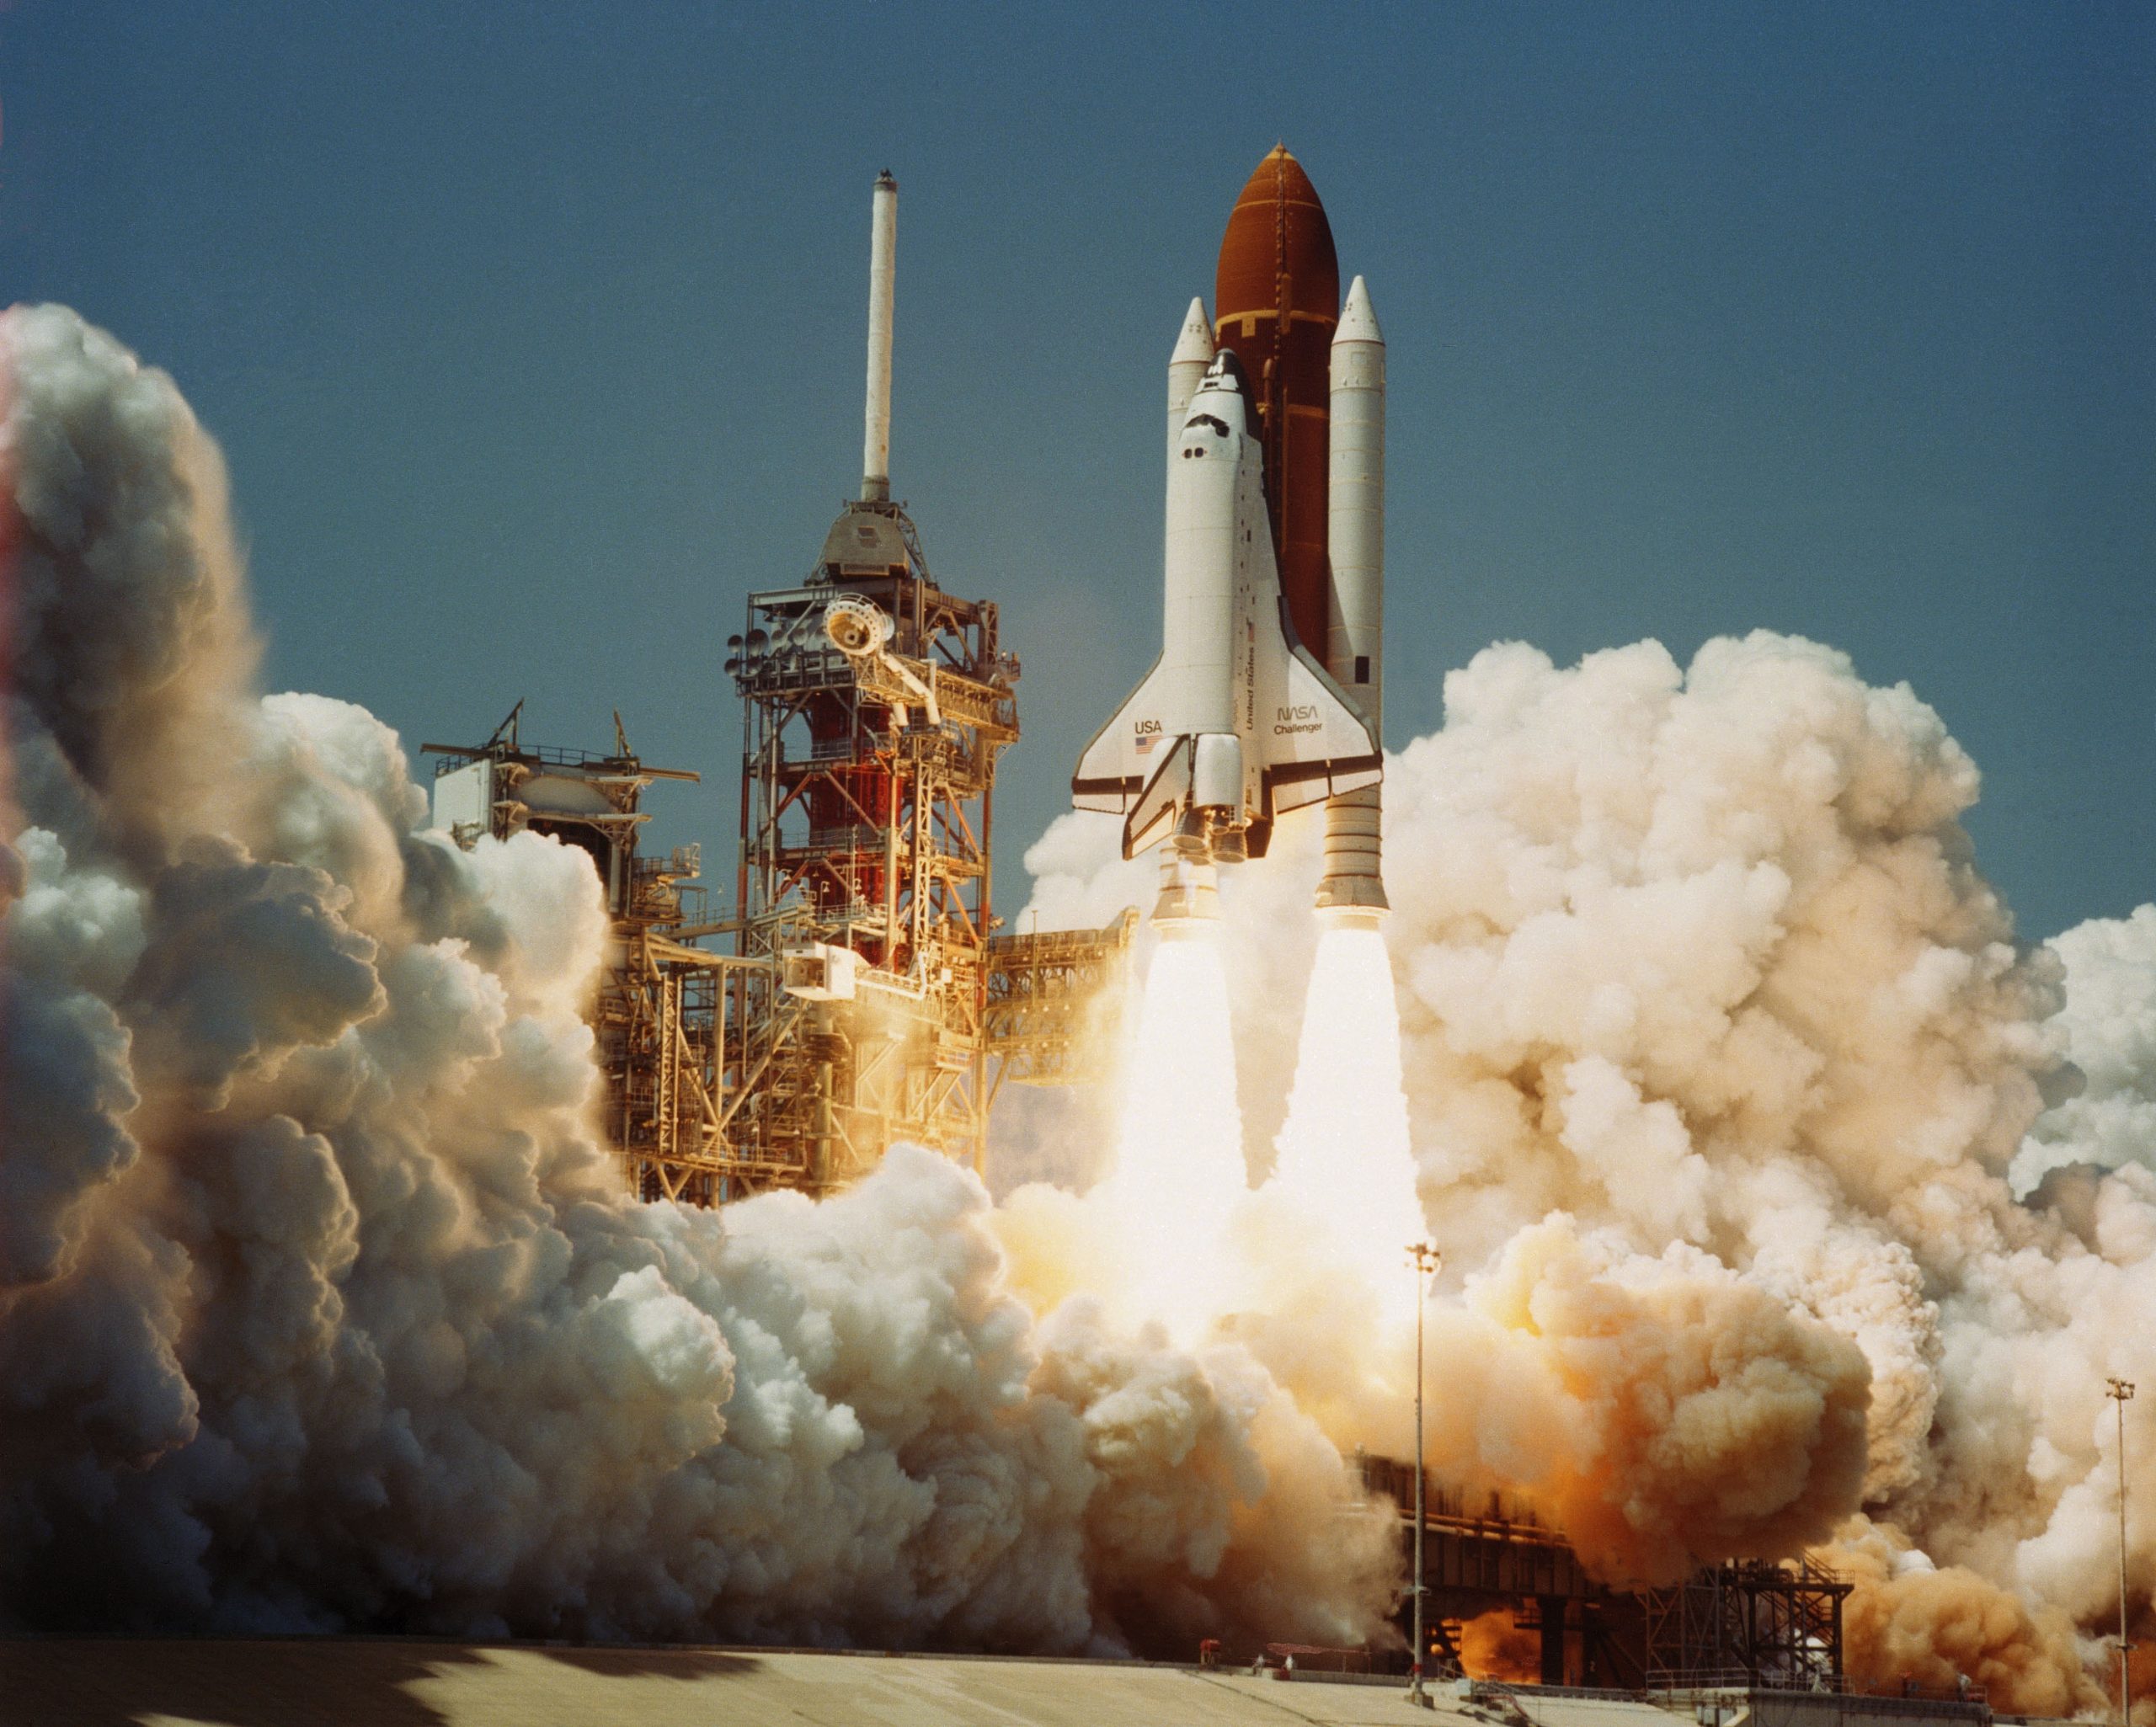 A space shuttle, the Challenger, in take off, showing flames exiting rockets and surrounded by billowing clouds created by smoke. Space Transportation System Number 6, Orbiter Challenger, lifts off from Pad 39A carrying astronauts Paul J. Weitz, Koral J. Bobko, Donald H. Peterson and Dr. Story Musgrave.